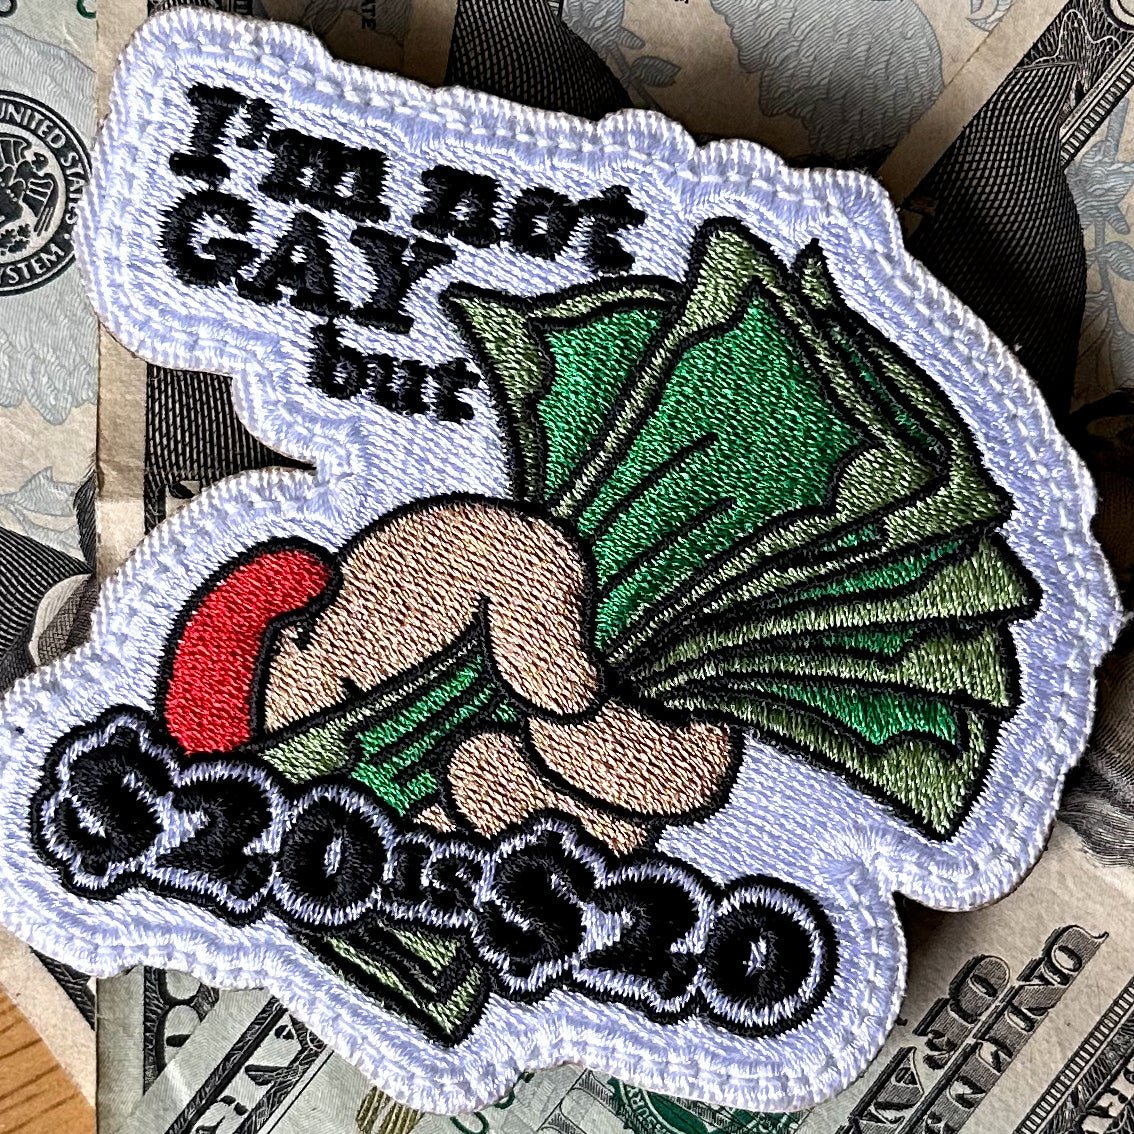 I'm Not Gay But $20 is $20 - 3.25" Laser Cut Patch